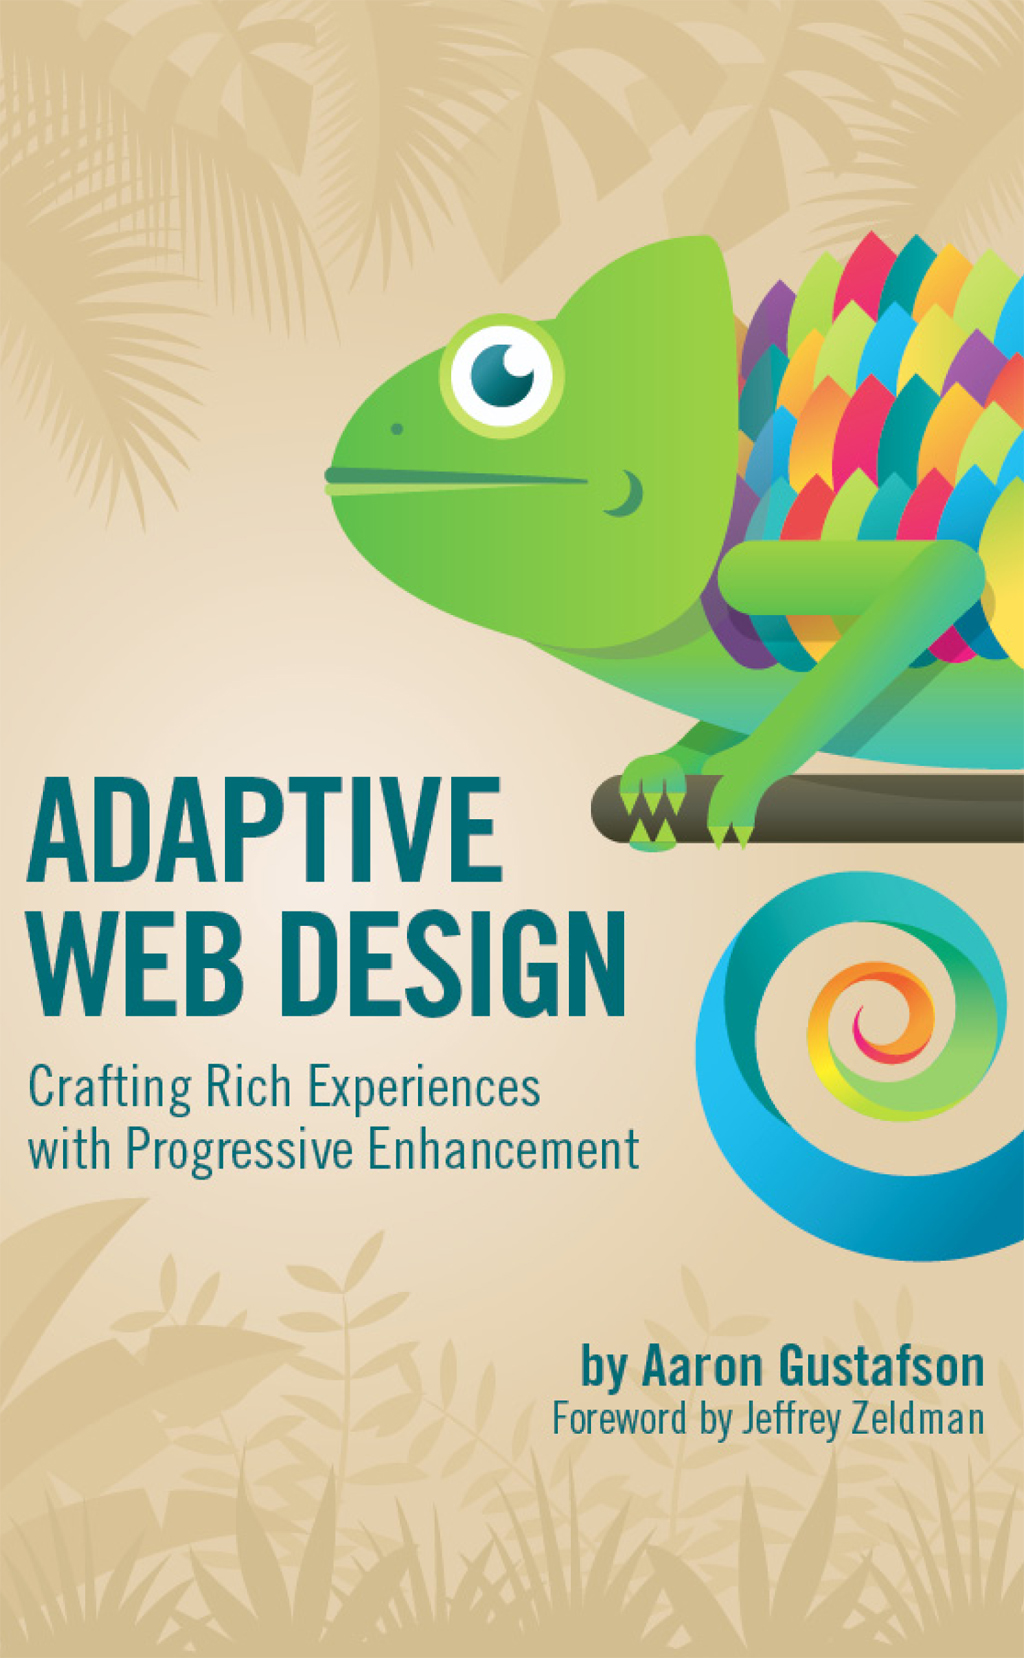 Front Cover of Adaptive Web Design by Aaron Gustafson